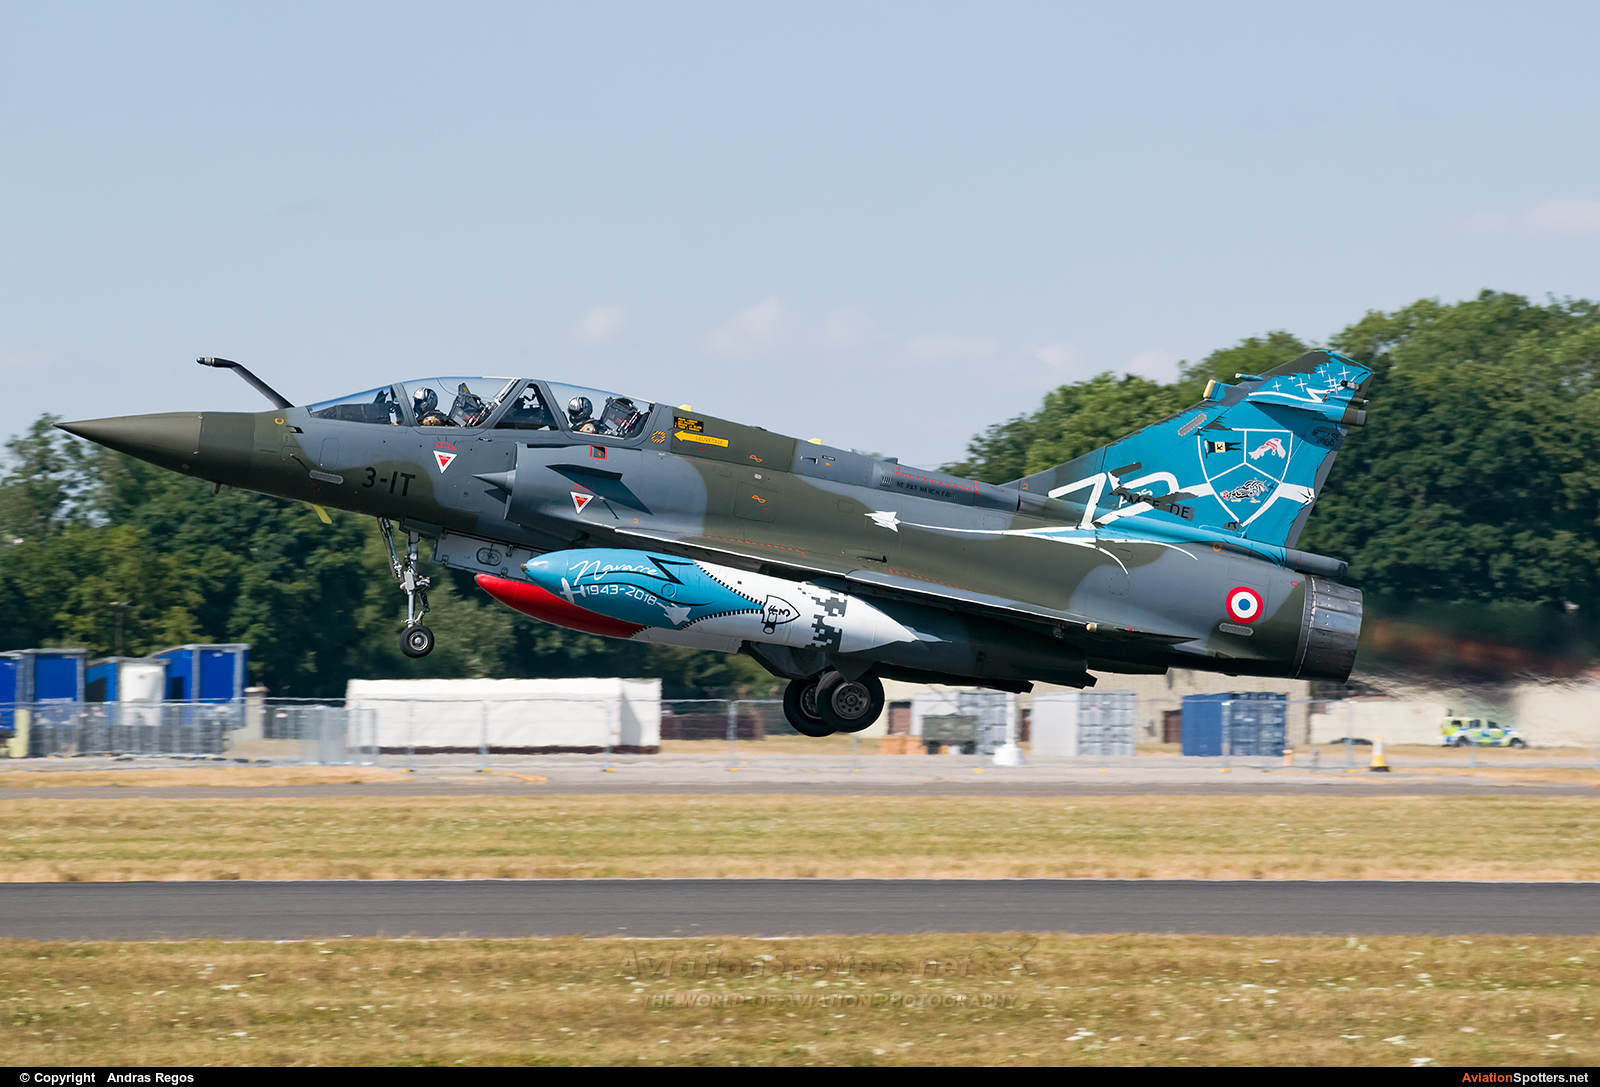 France - Air Force  -  Mirage 2000D  (624) By Andras Regos (regos)